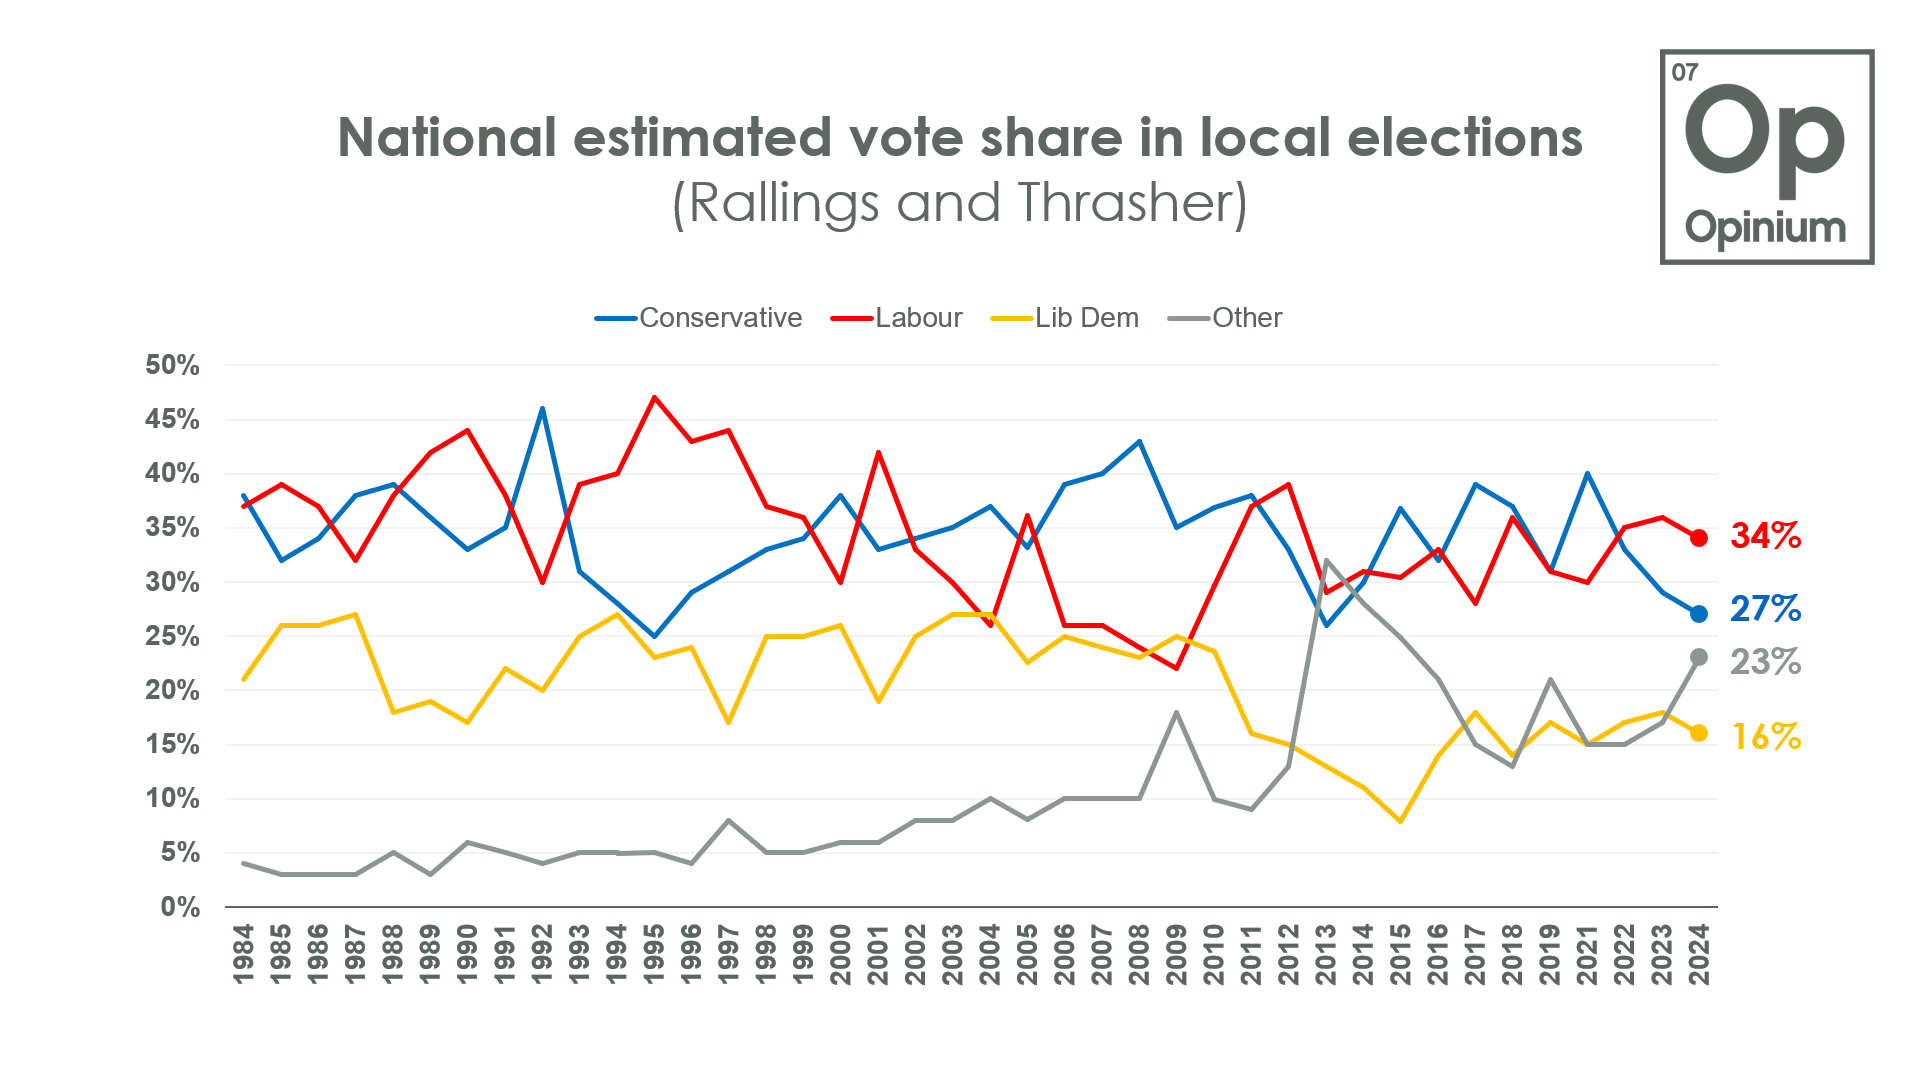 James Crouch: The local elections point to a Labour majority – but not to a Conservative wipe out